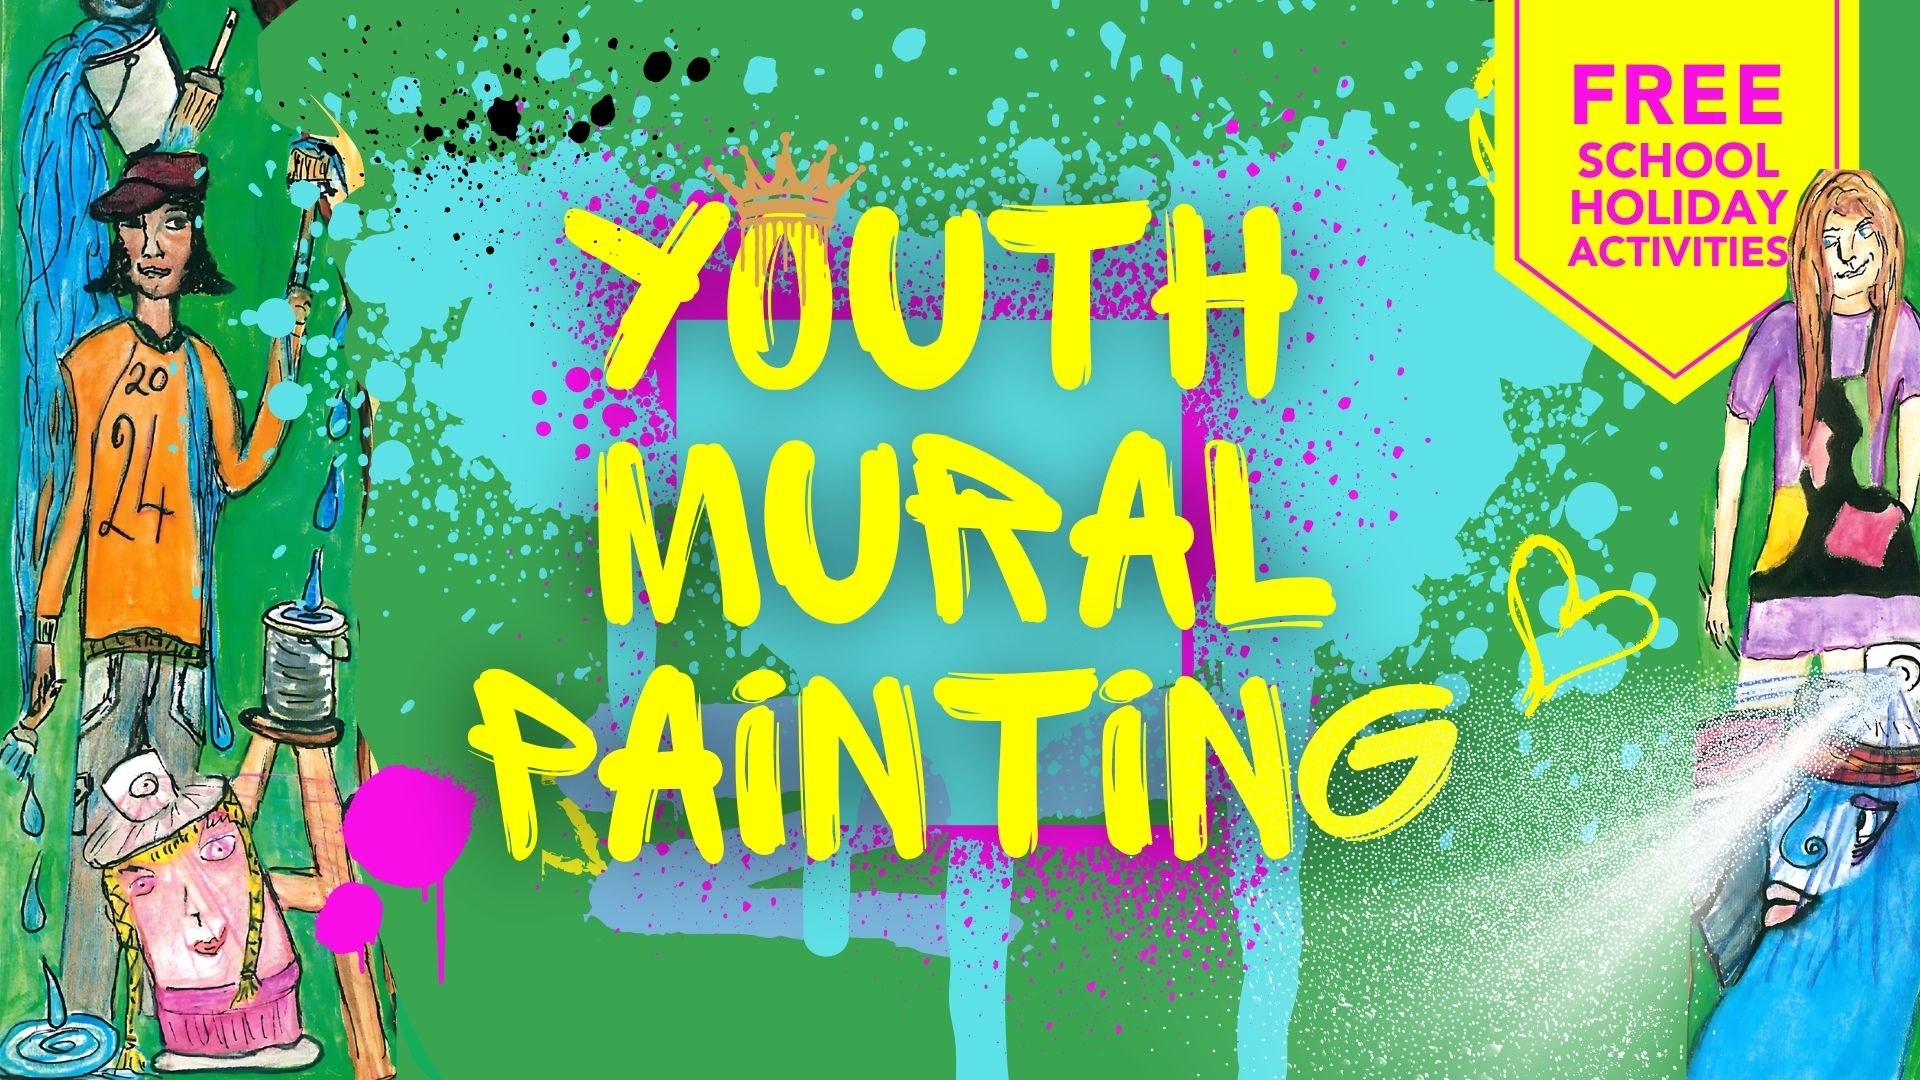 Youth Mural Painting